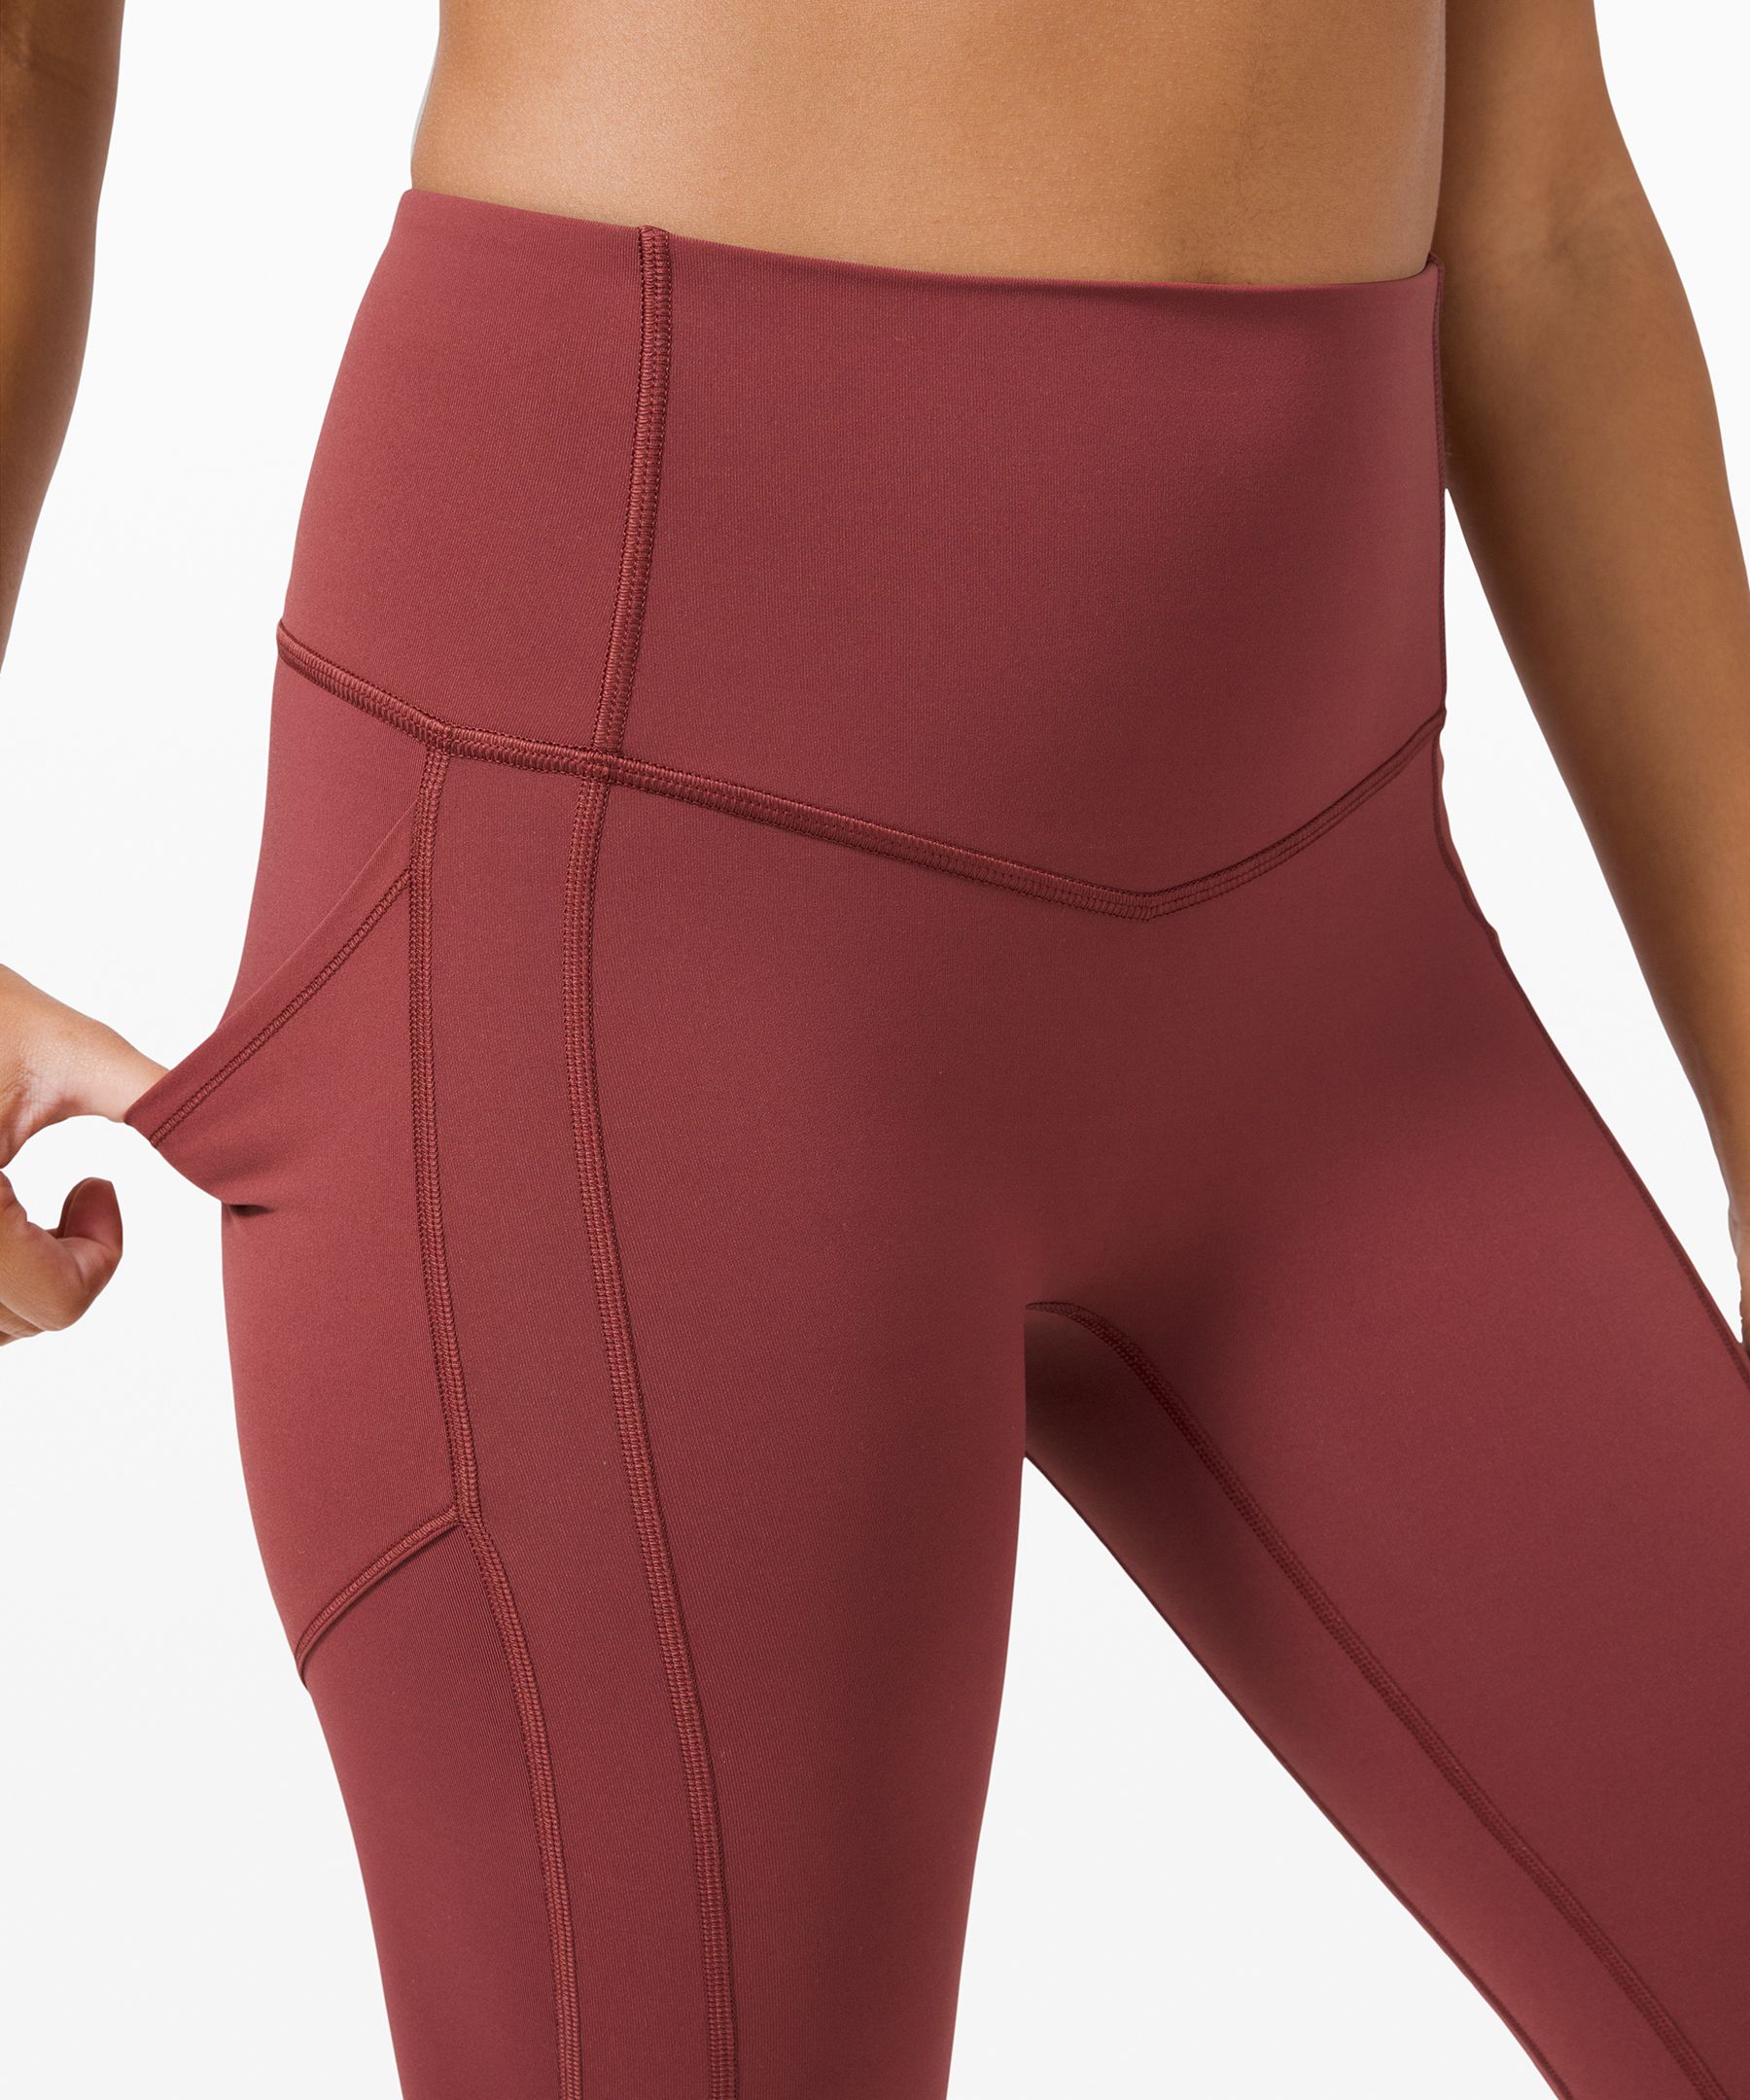 lululemon all the right places legging